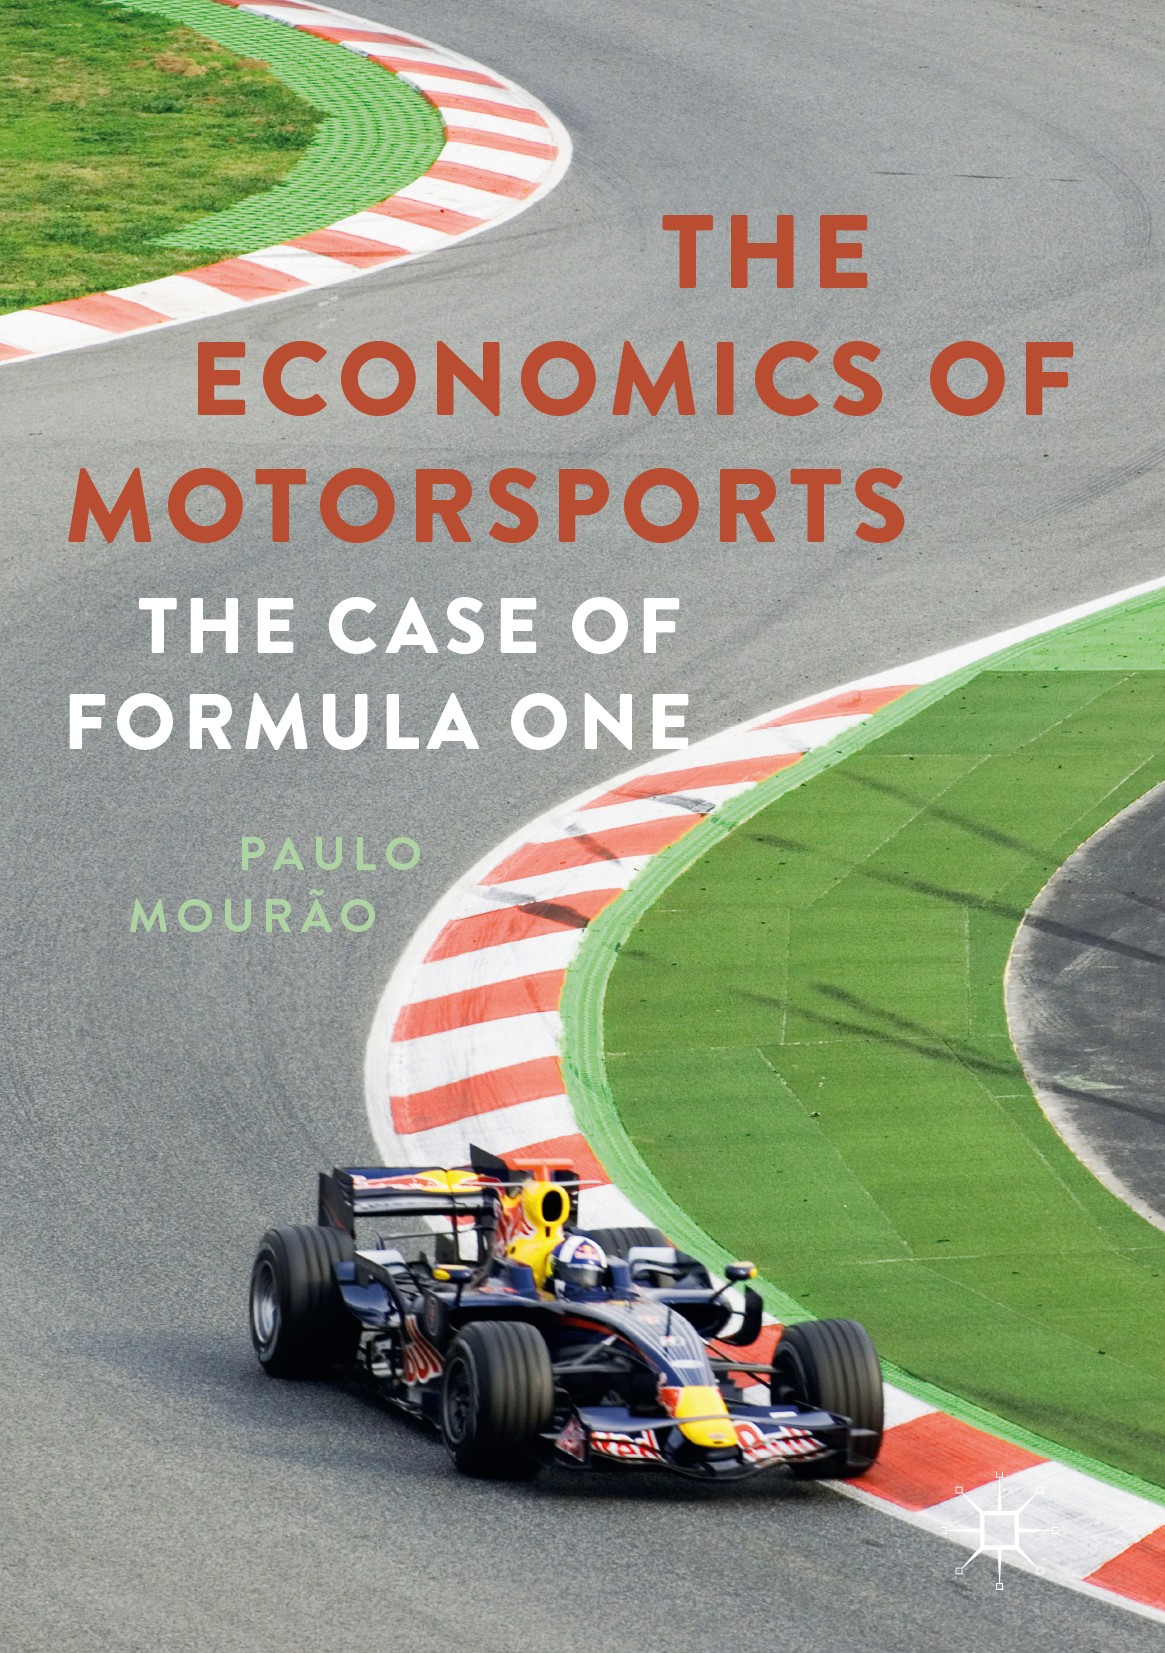 The Oil in the Engines—The Revenues of Formula One SpringerLink